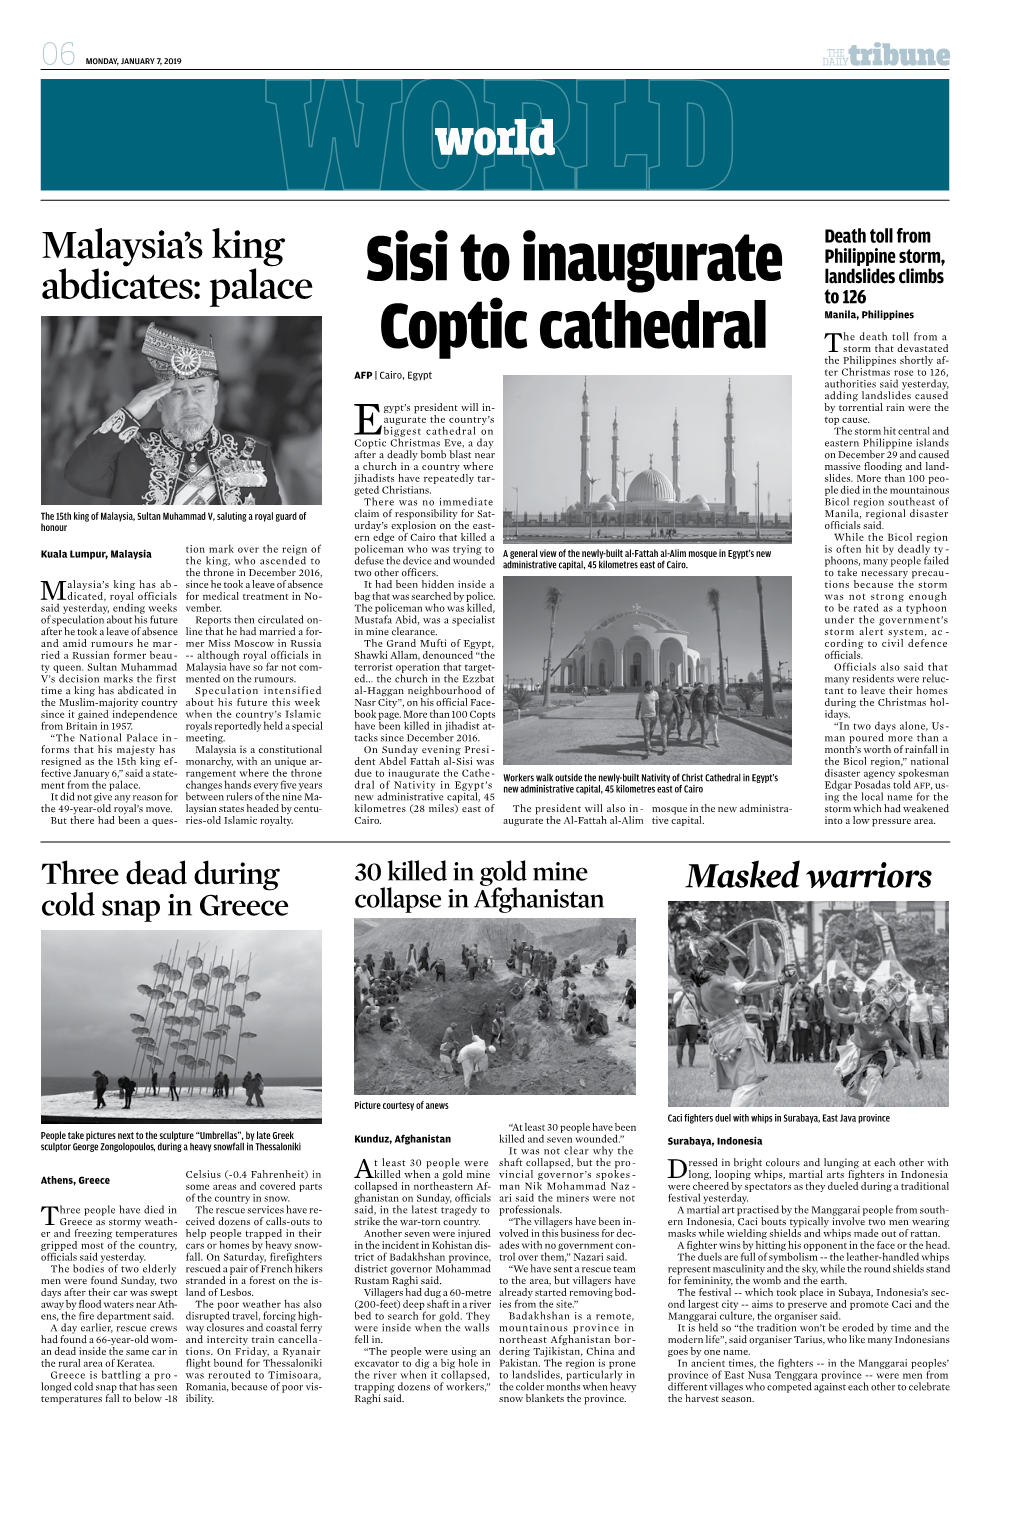 Sisi to Inaugurate Coptic Cathedral